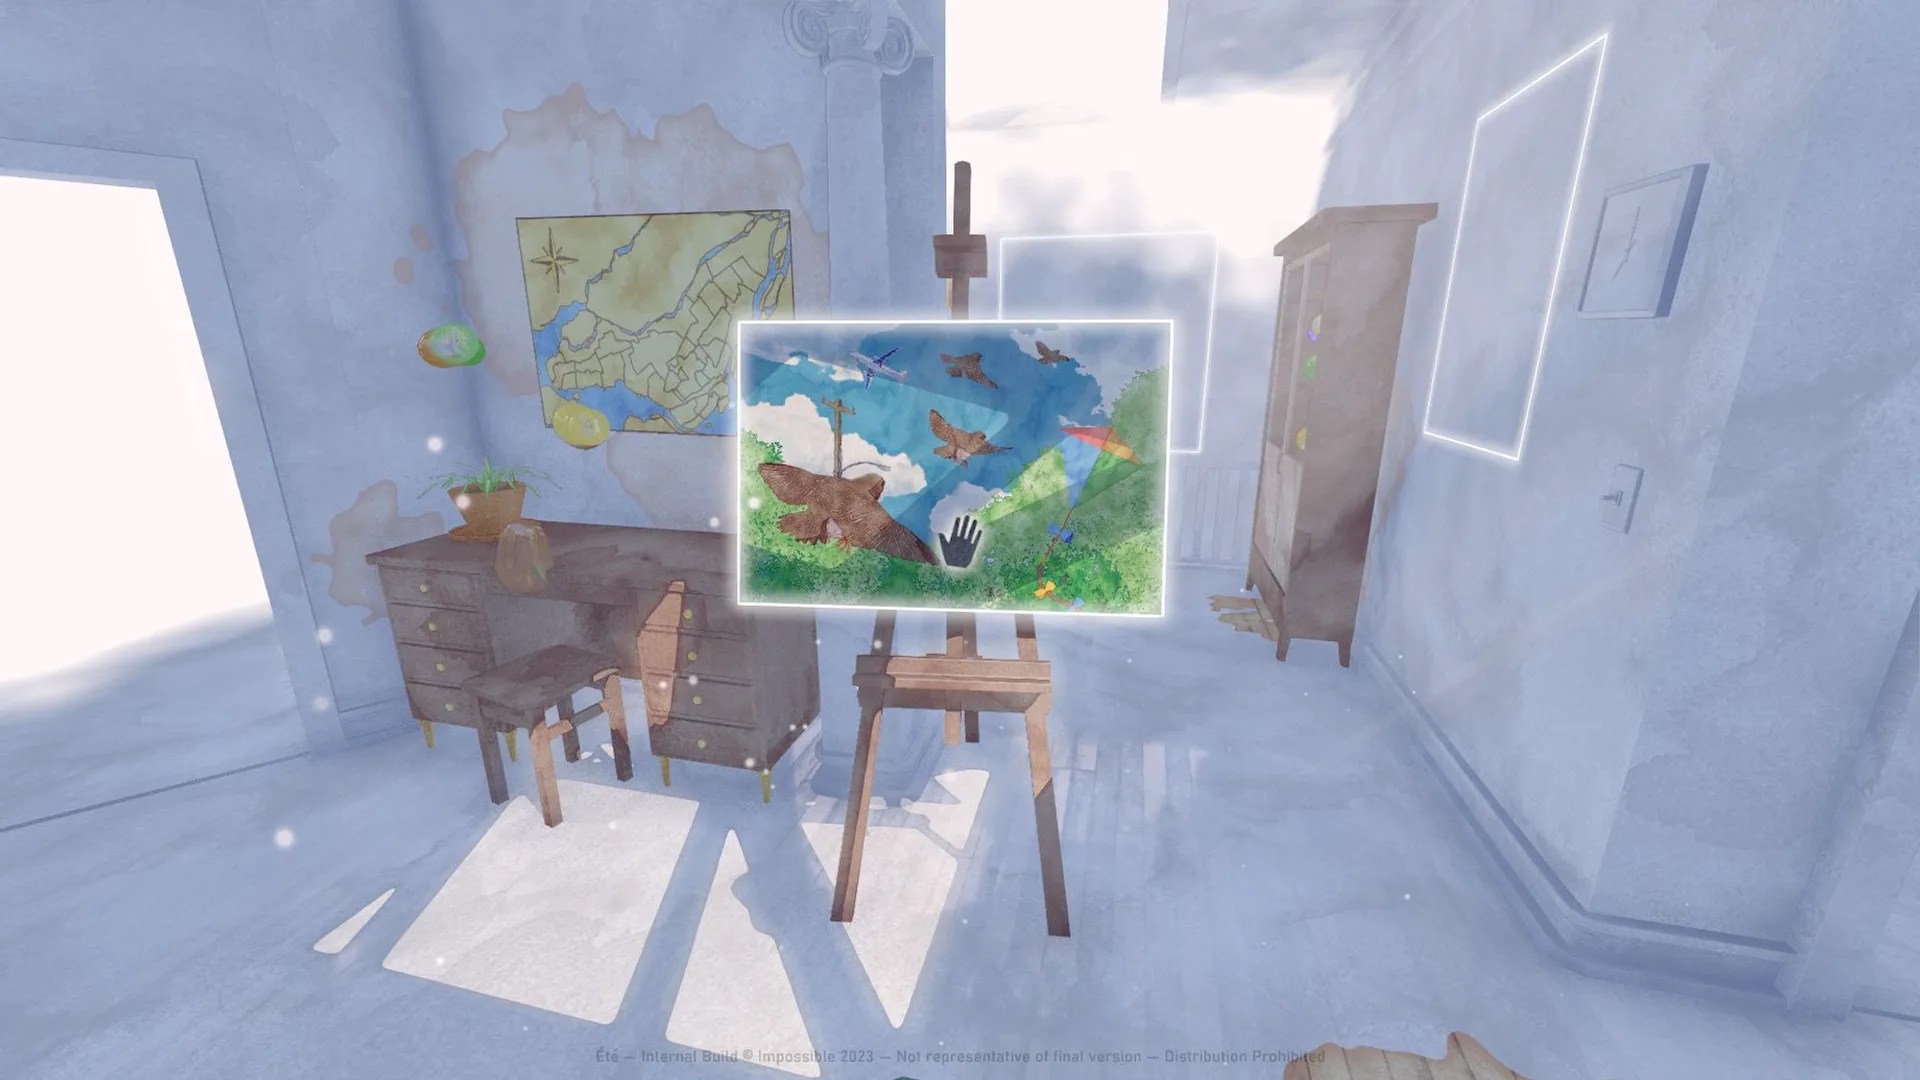 A player approaches a painting in Ete.